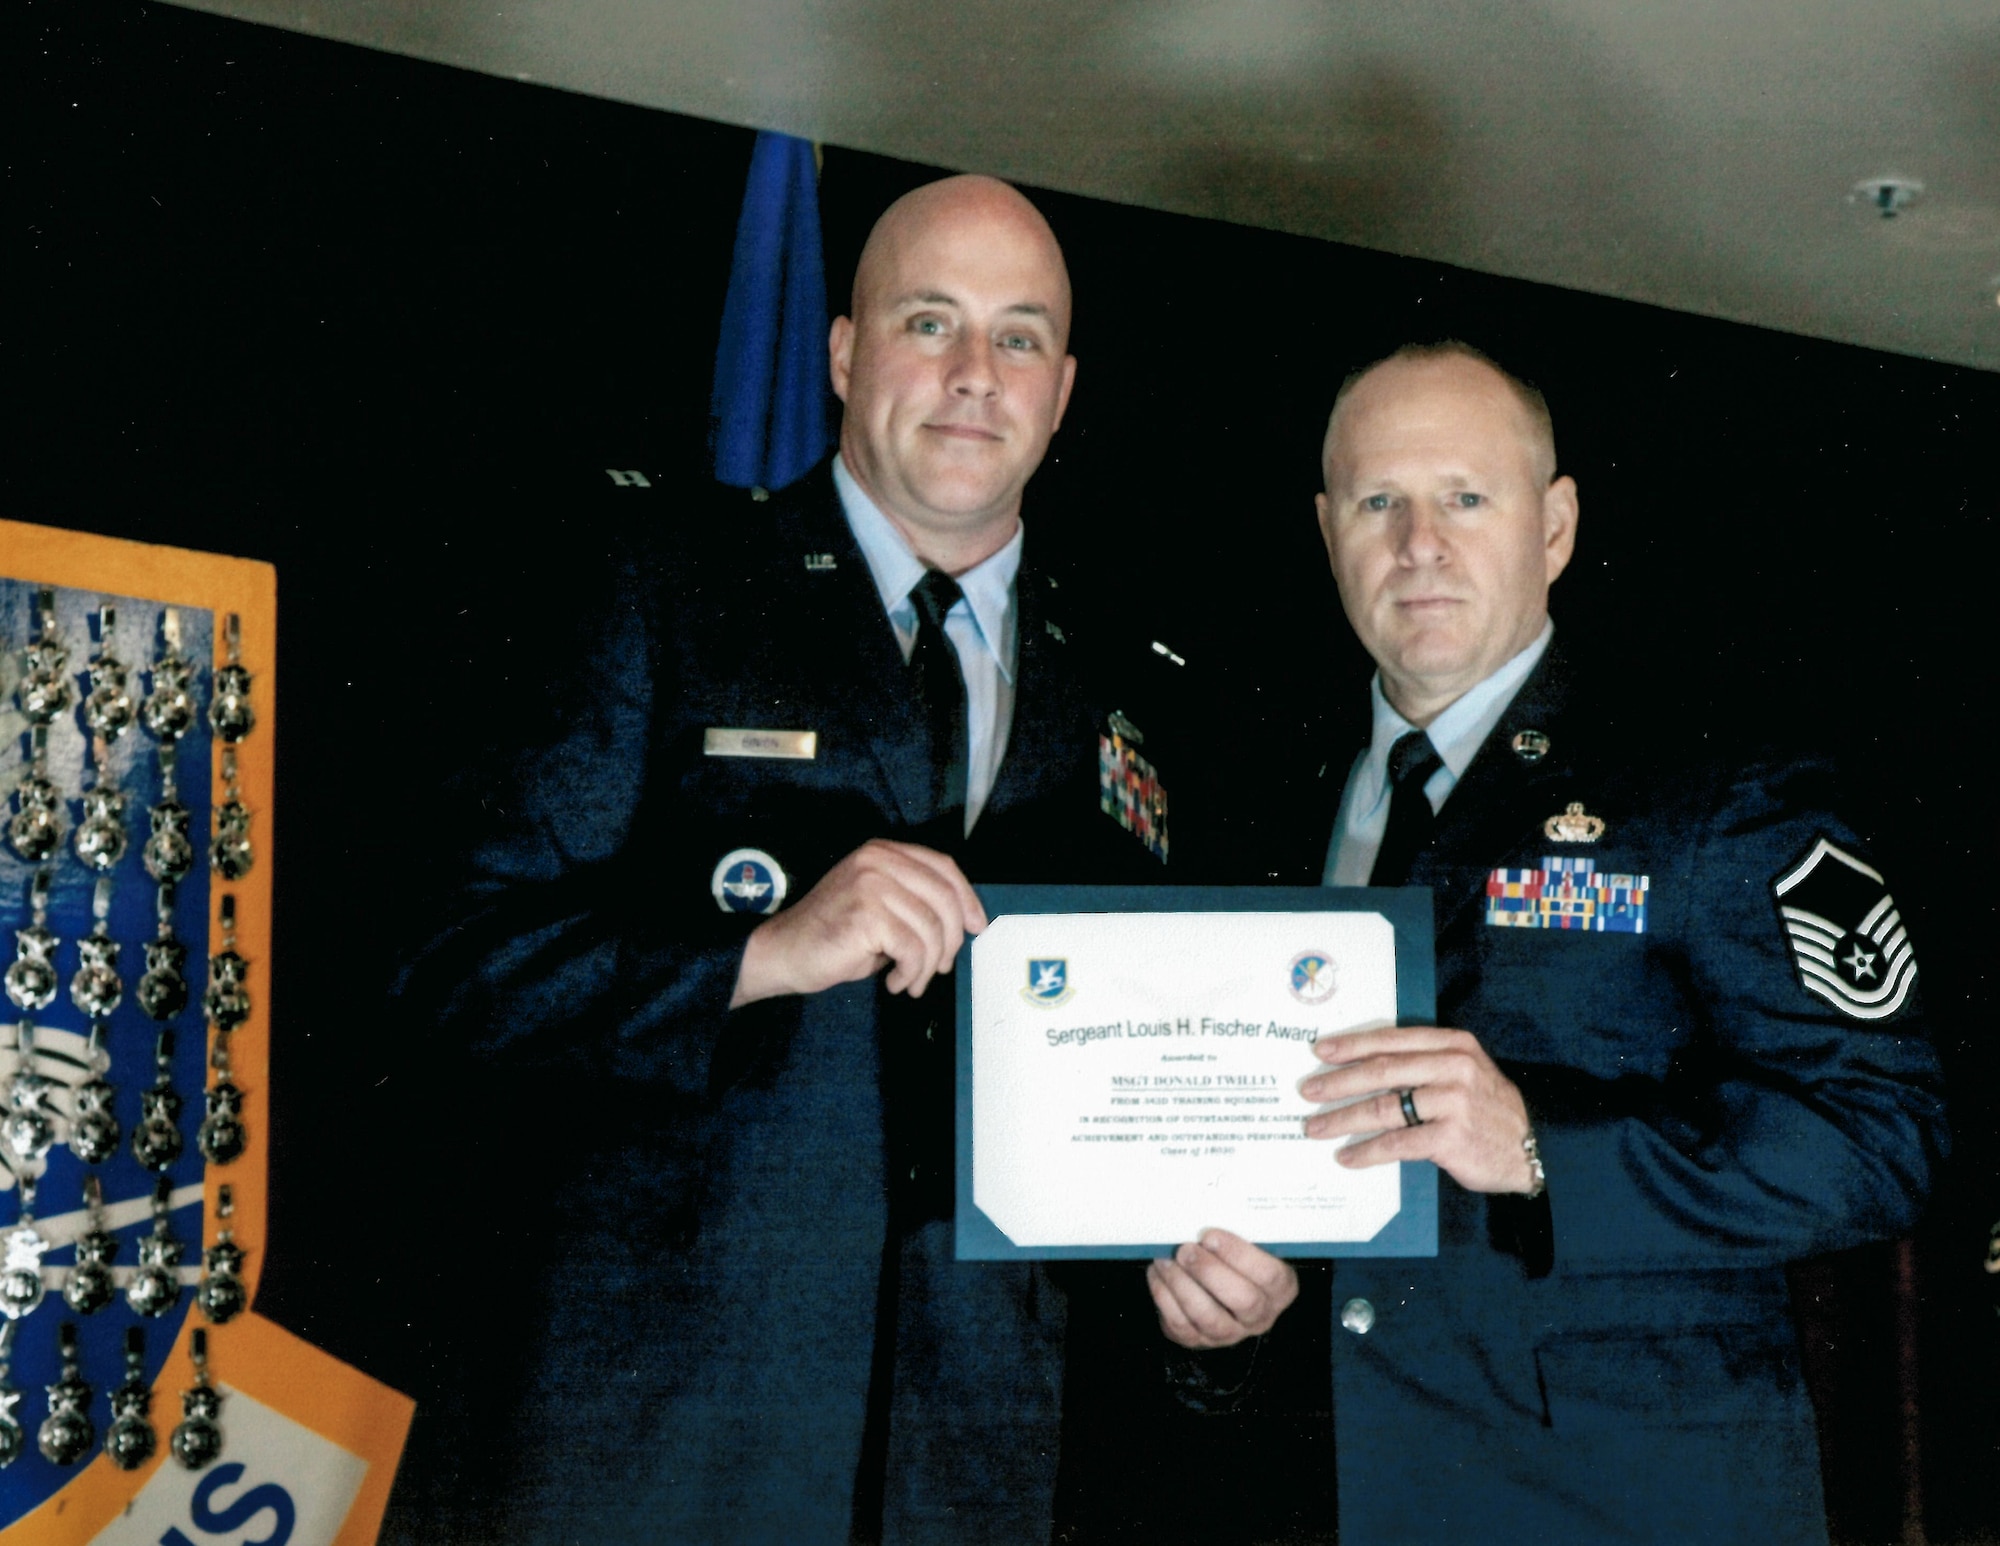 Master Sgt. Donald Twilley, right, receives the Louis H. Fisher Award during his graduation ceremony from the U.S. Air Force Security Forces Academy Apprentice Course Aug. 7, 2018, at Joint Base San Antonio-Lakeland, Texas.  The Louis H. Fischer Award is awarded to a security forces member who’s GPA is 97 percent or above, has received zero derogatory paperwork, passed all evaluations on the first attempt, earned marksmanship or “expert” with the M9 pistol, and is recommended by an instructor cadre and military training leaders. (Courtesy photo)